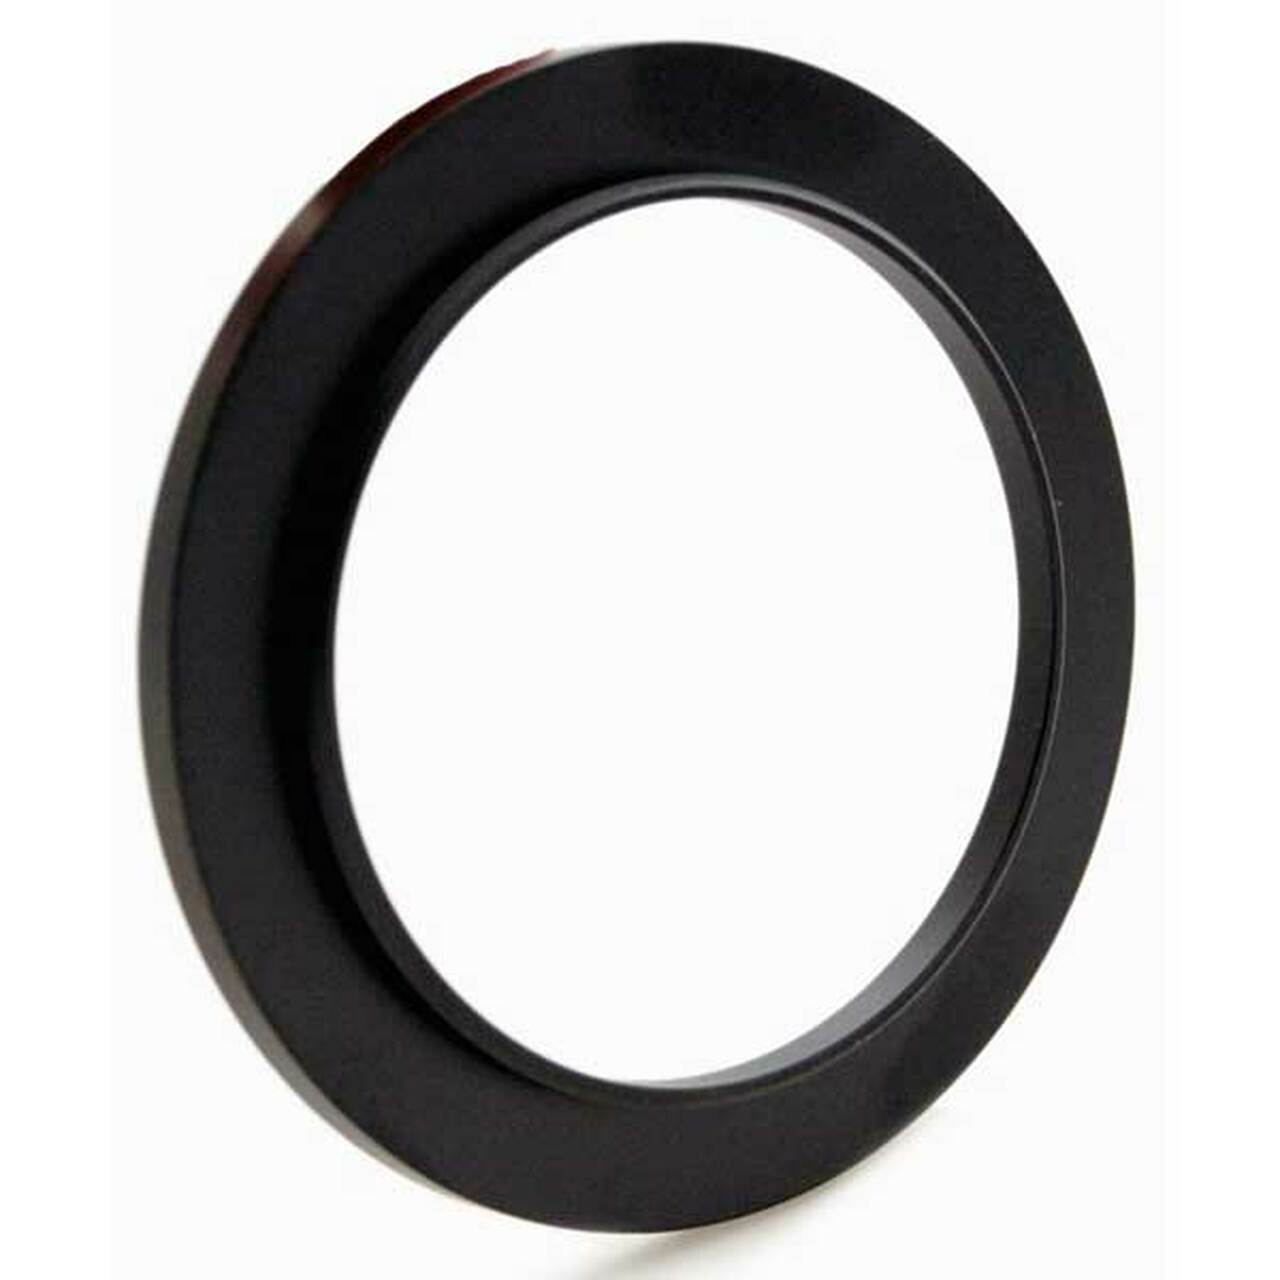 Promaster 5047 58-62mm Step Up Ring